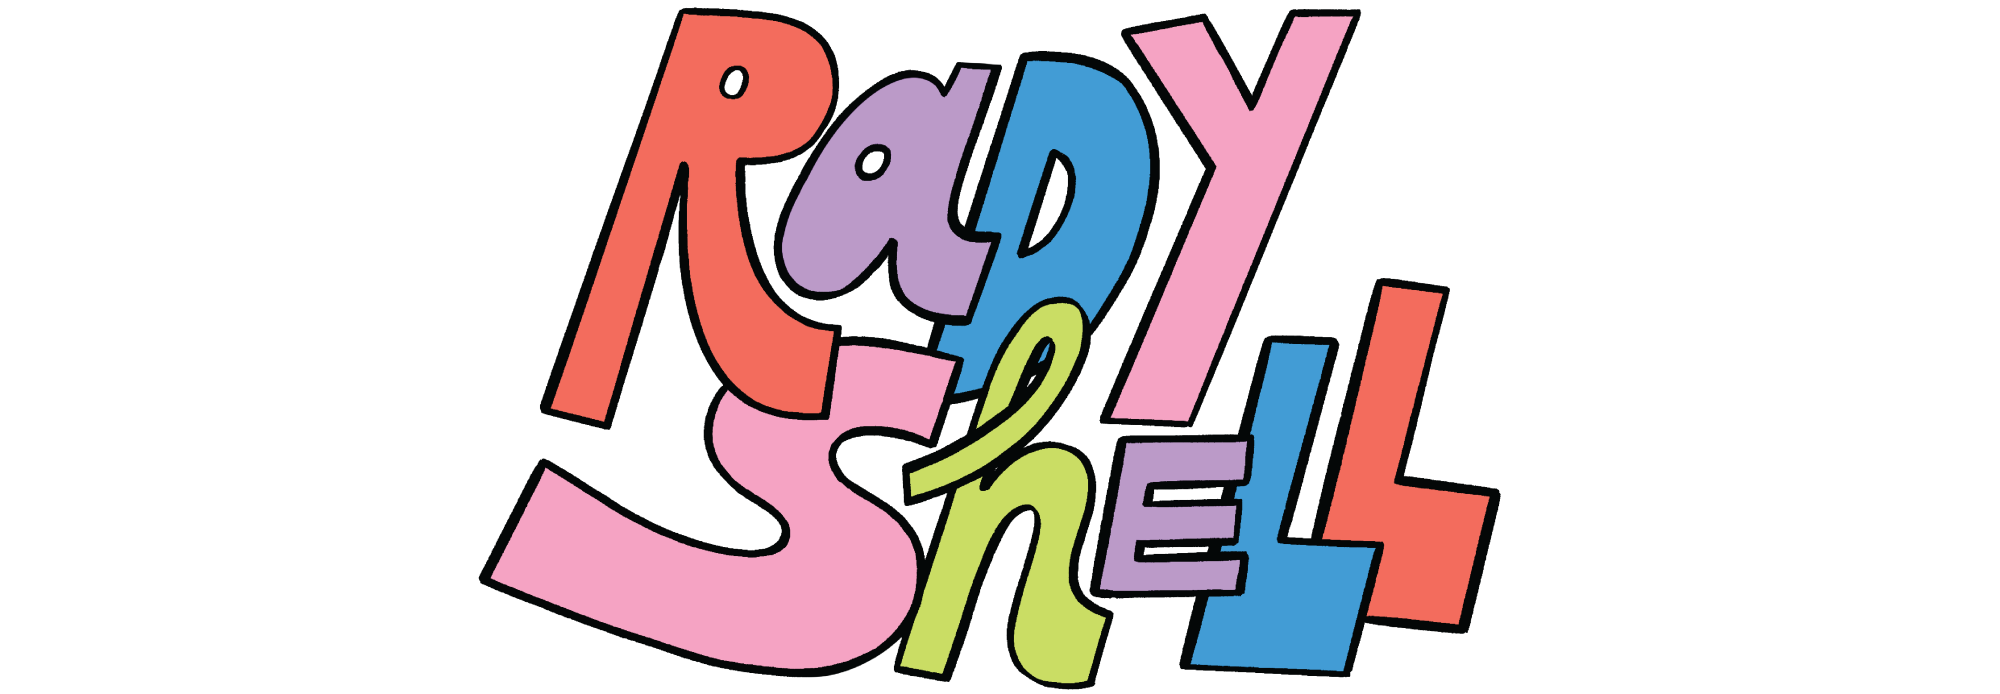 Colorful typography saying "Rady Shell"